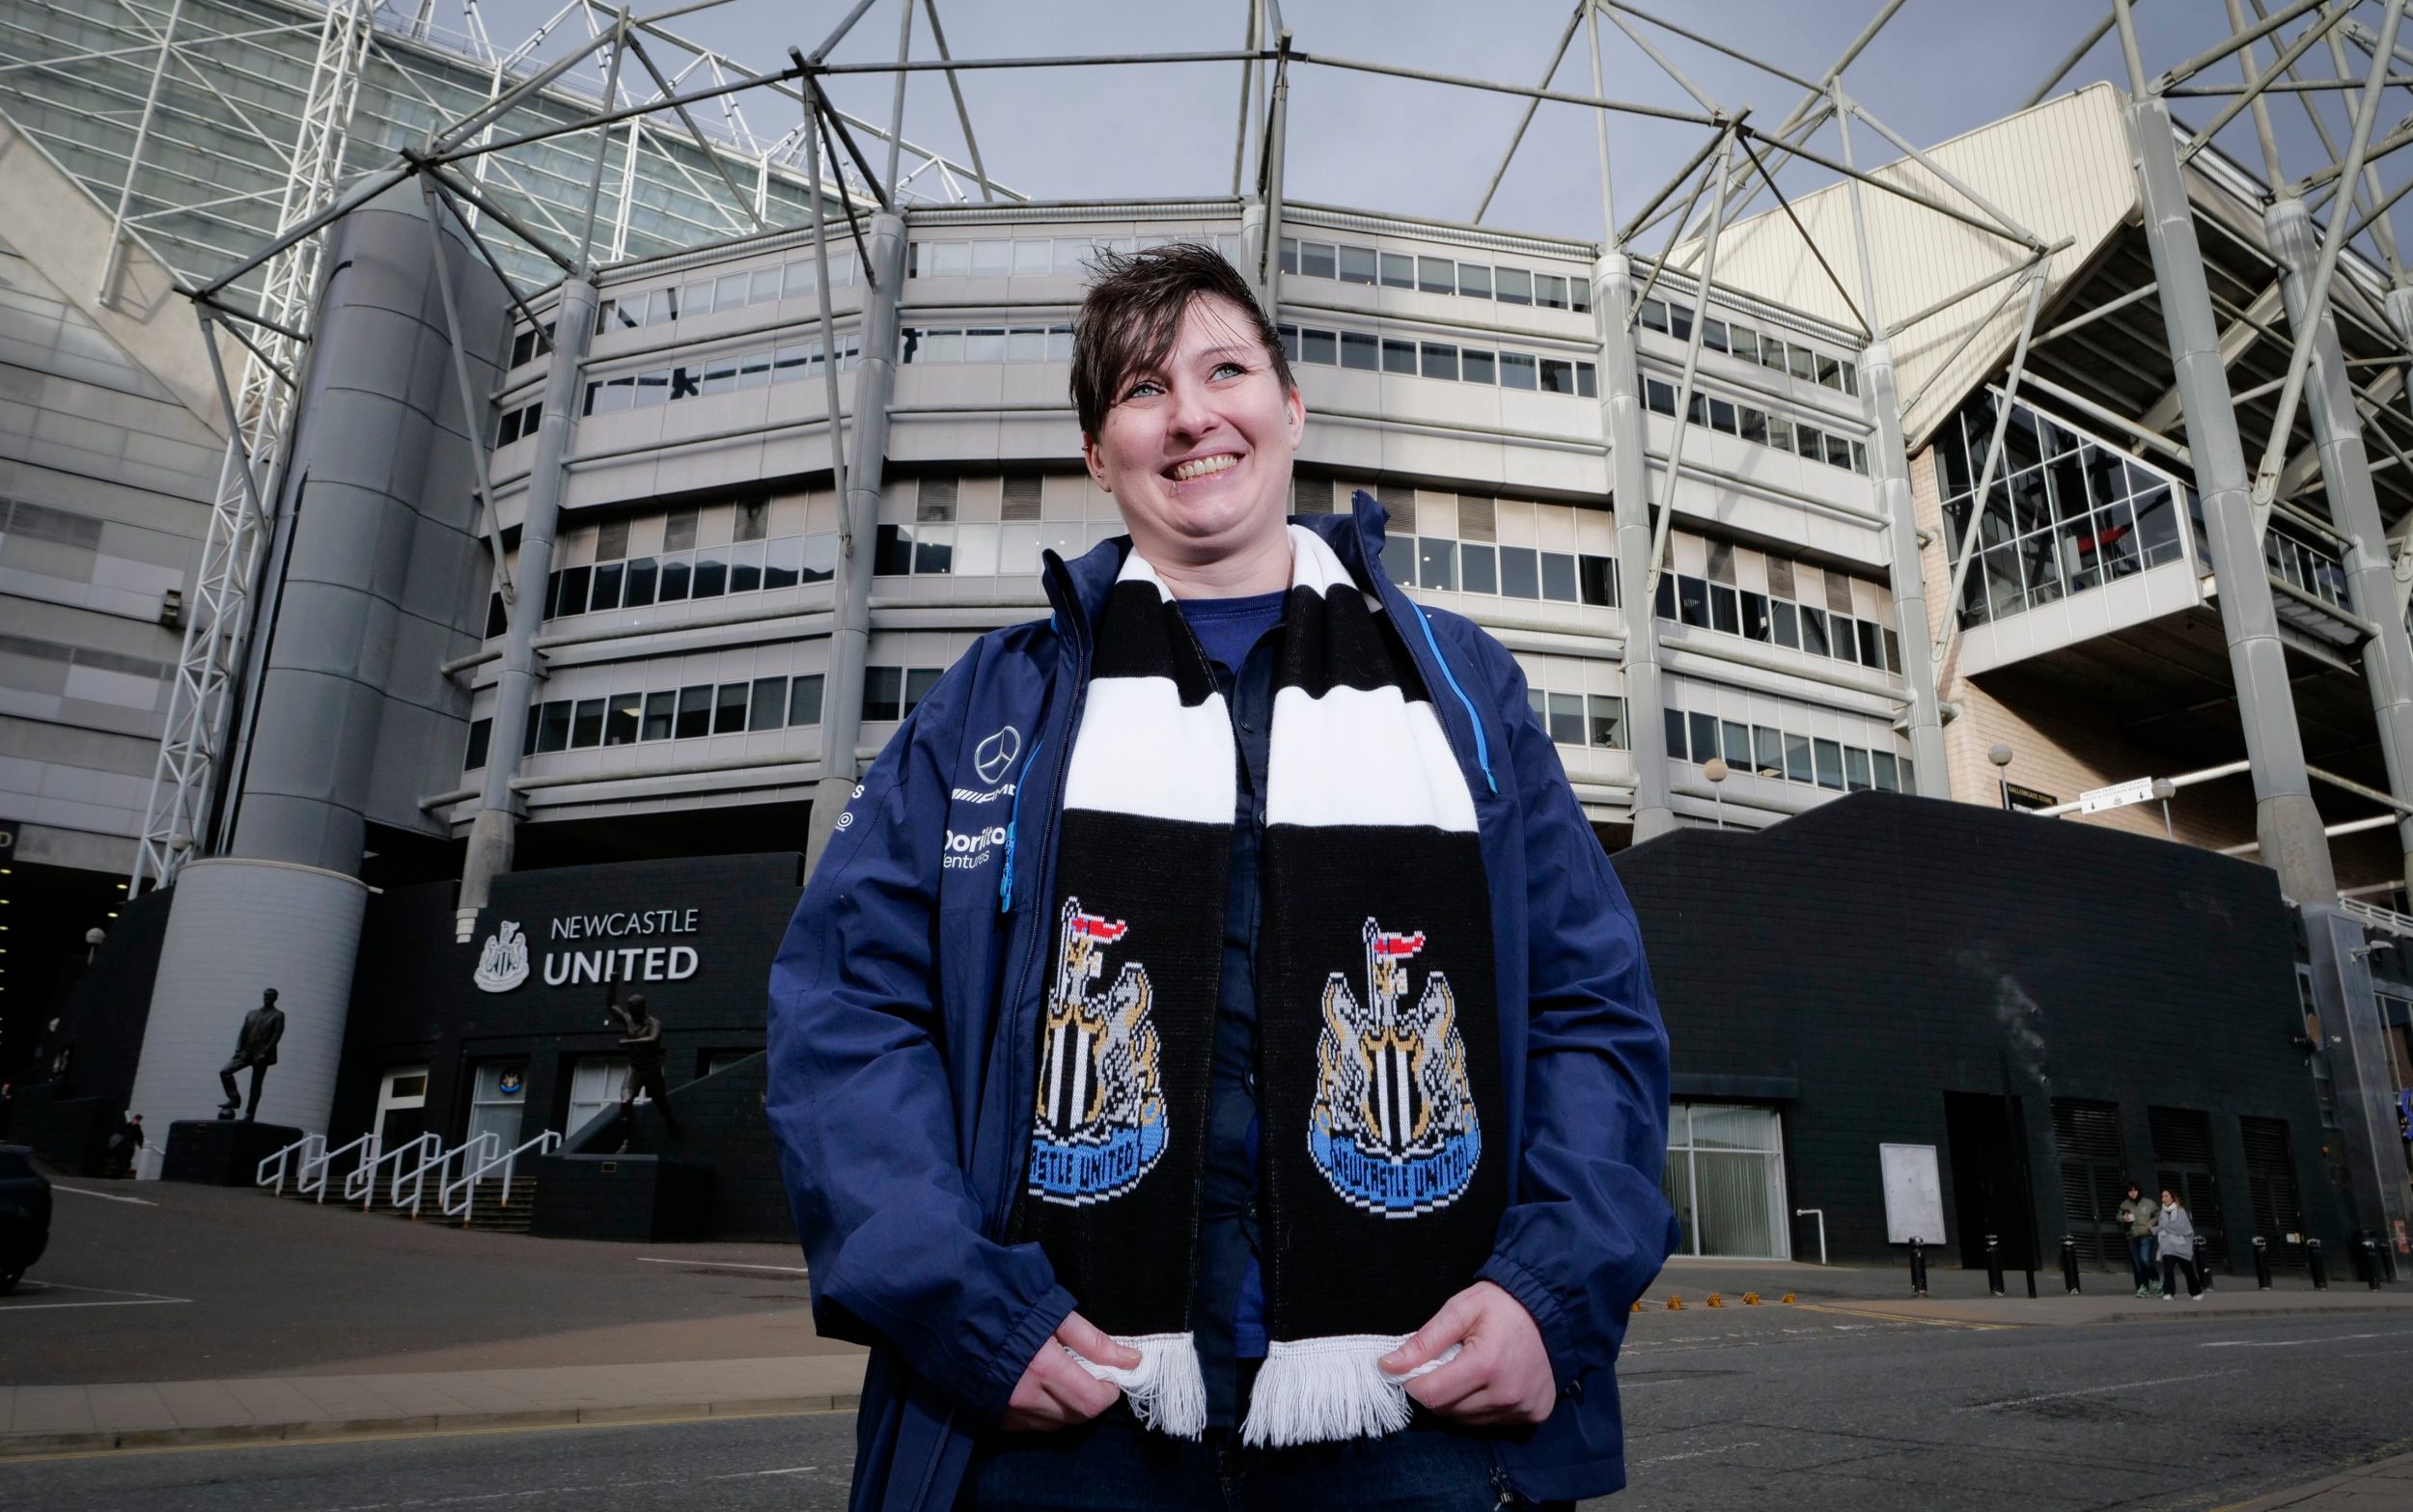 football fan banned over gender-critical posts after ‘stasi’ premier league investigation